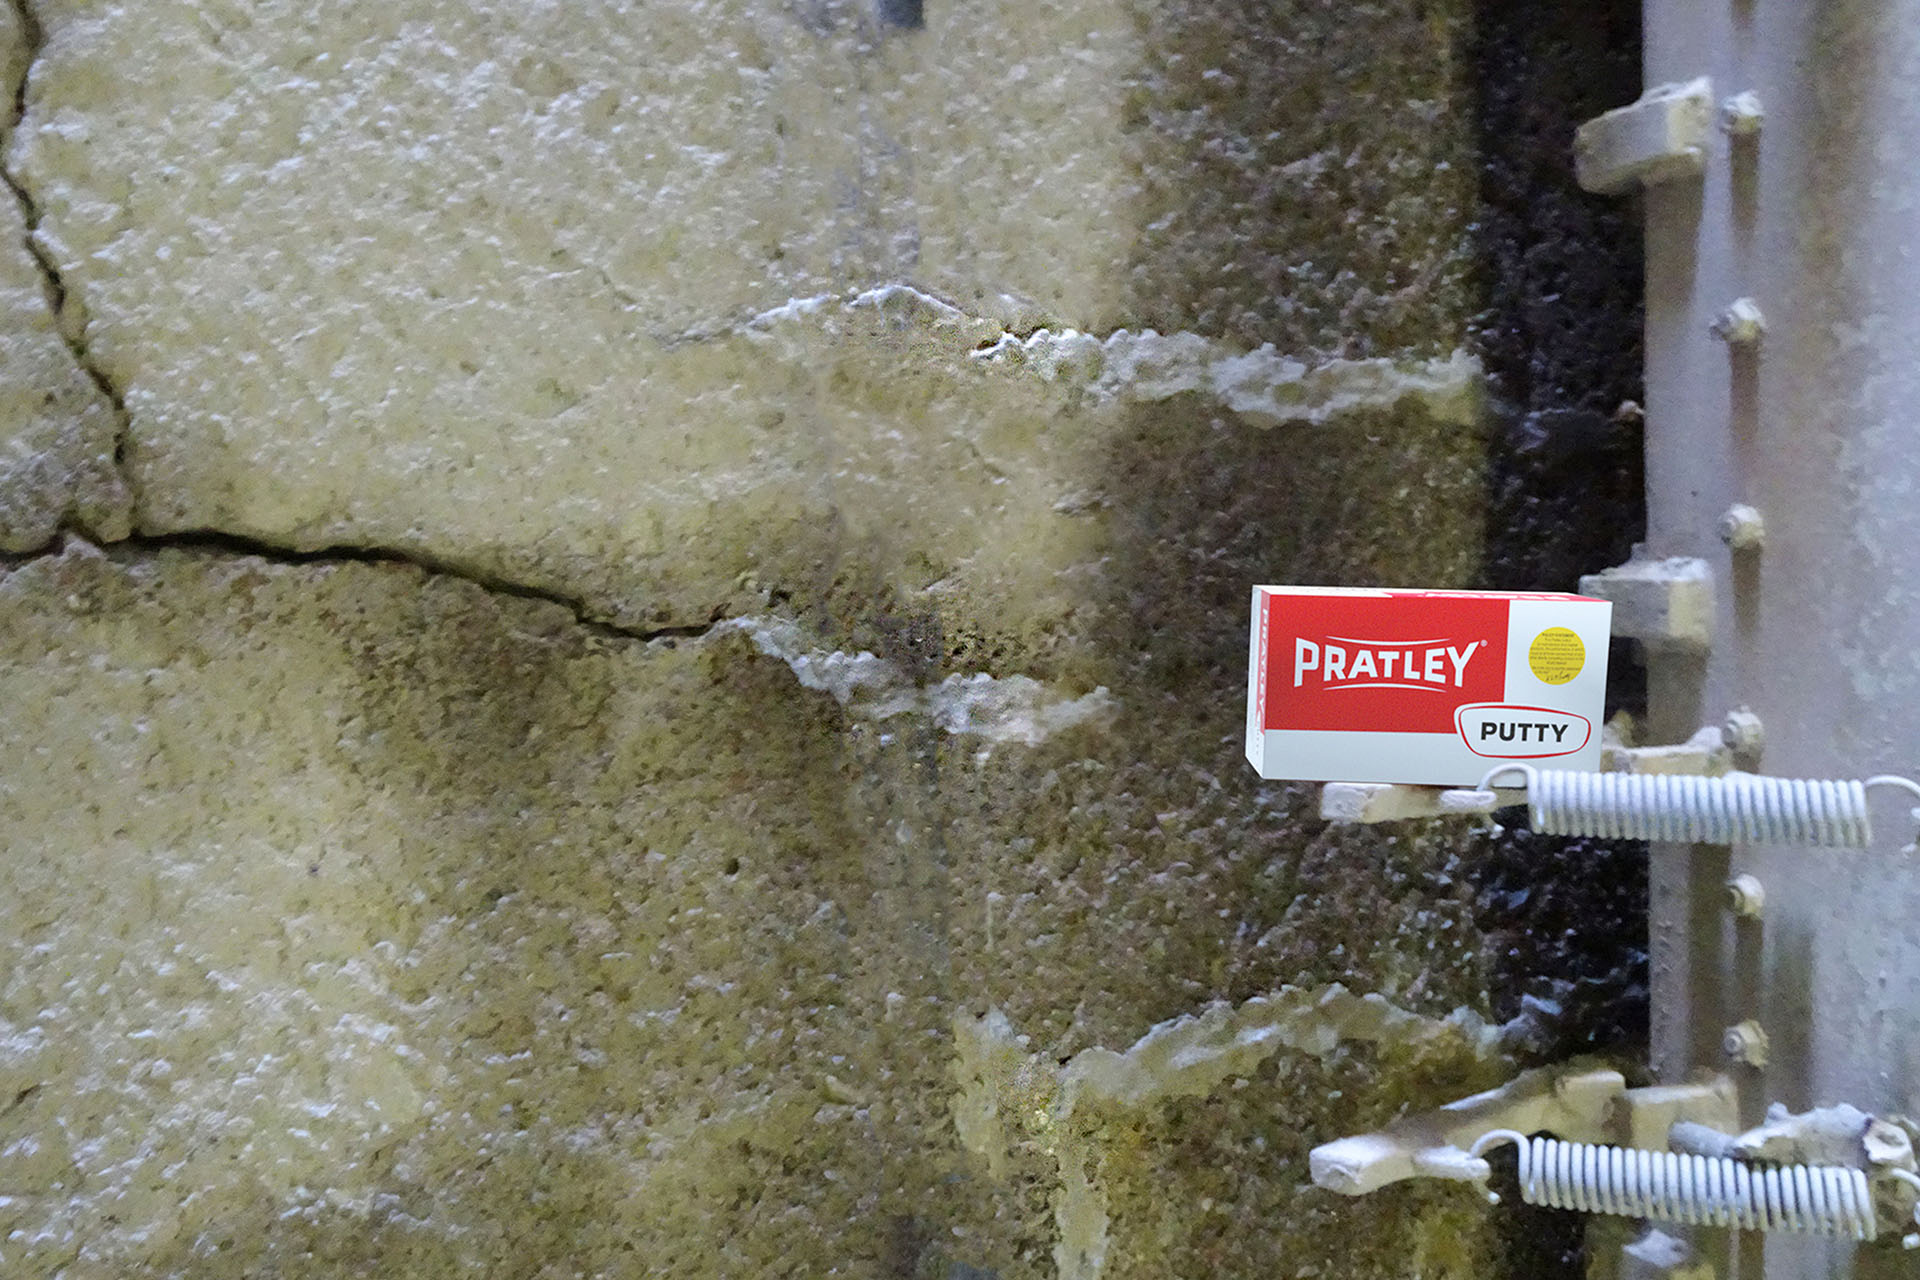 The main application of Pratley Putty is to seal the framework to avoid leakages during pouring.